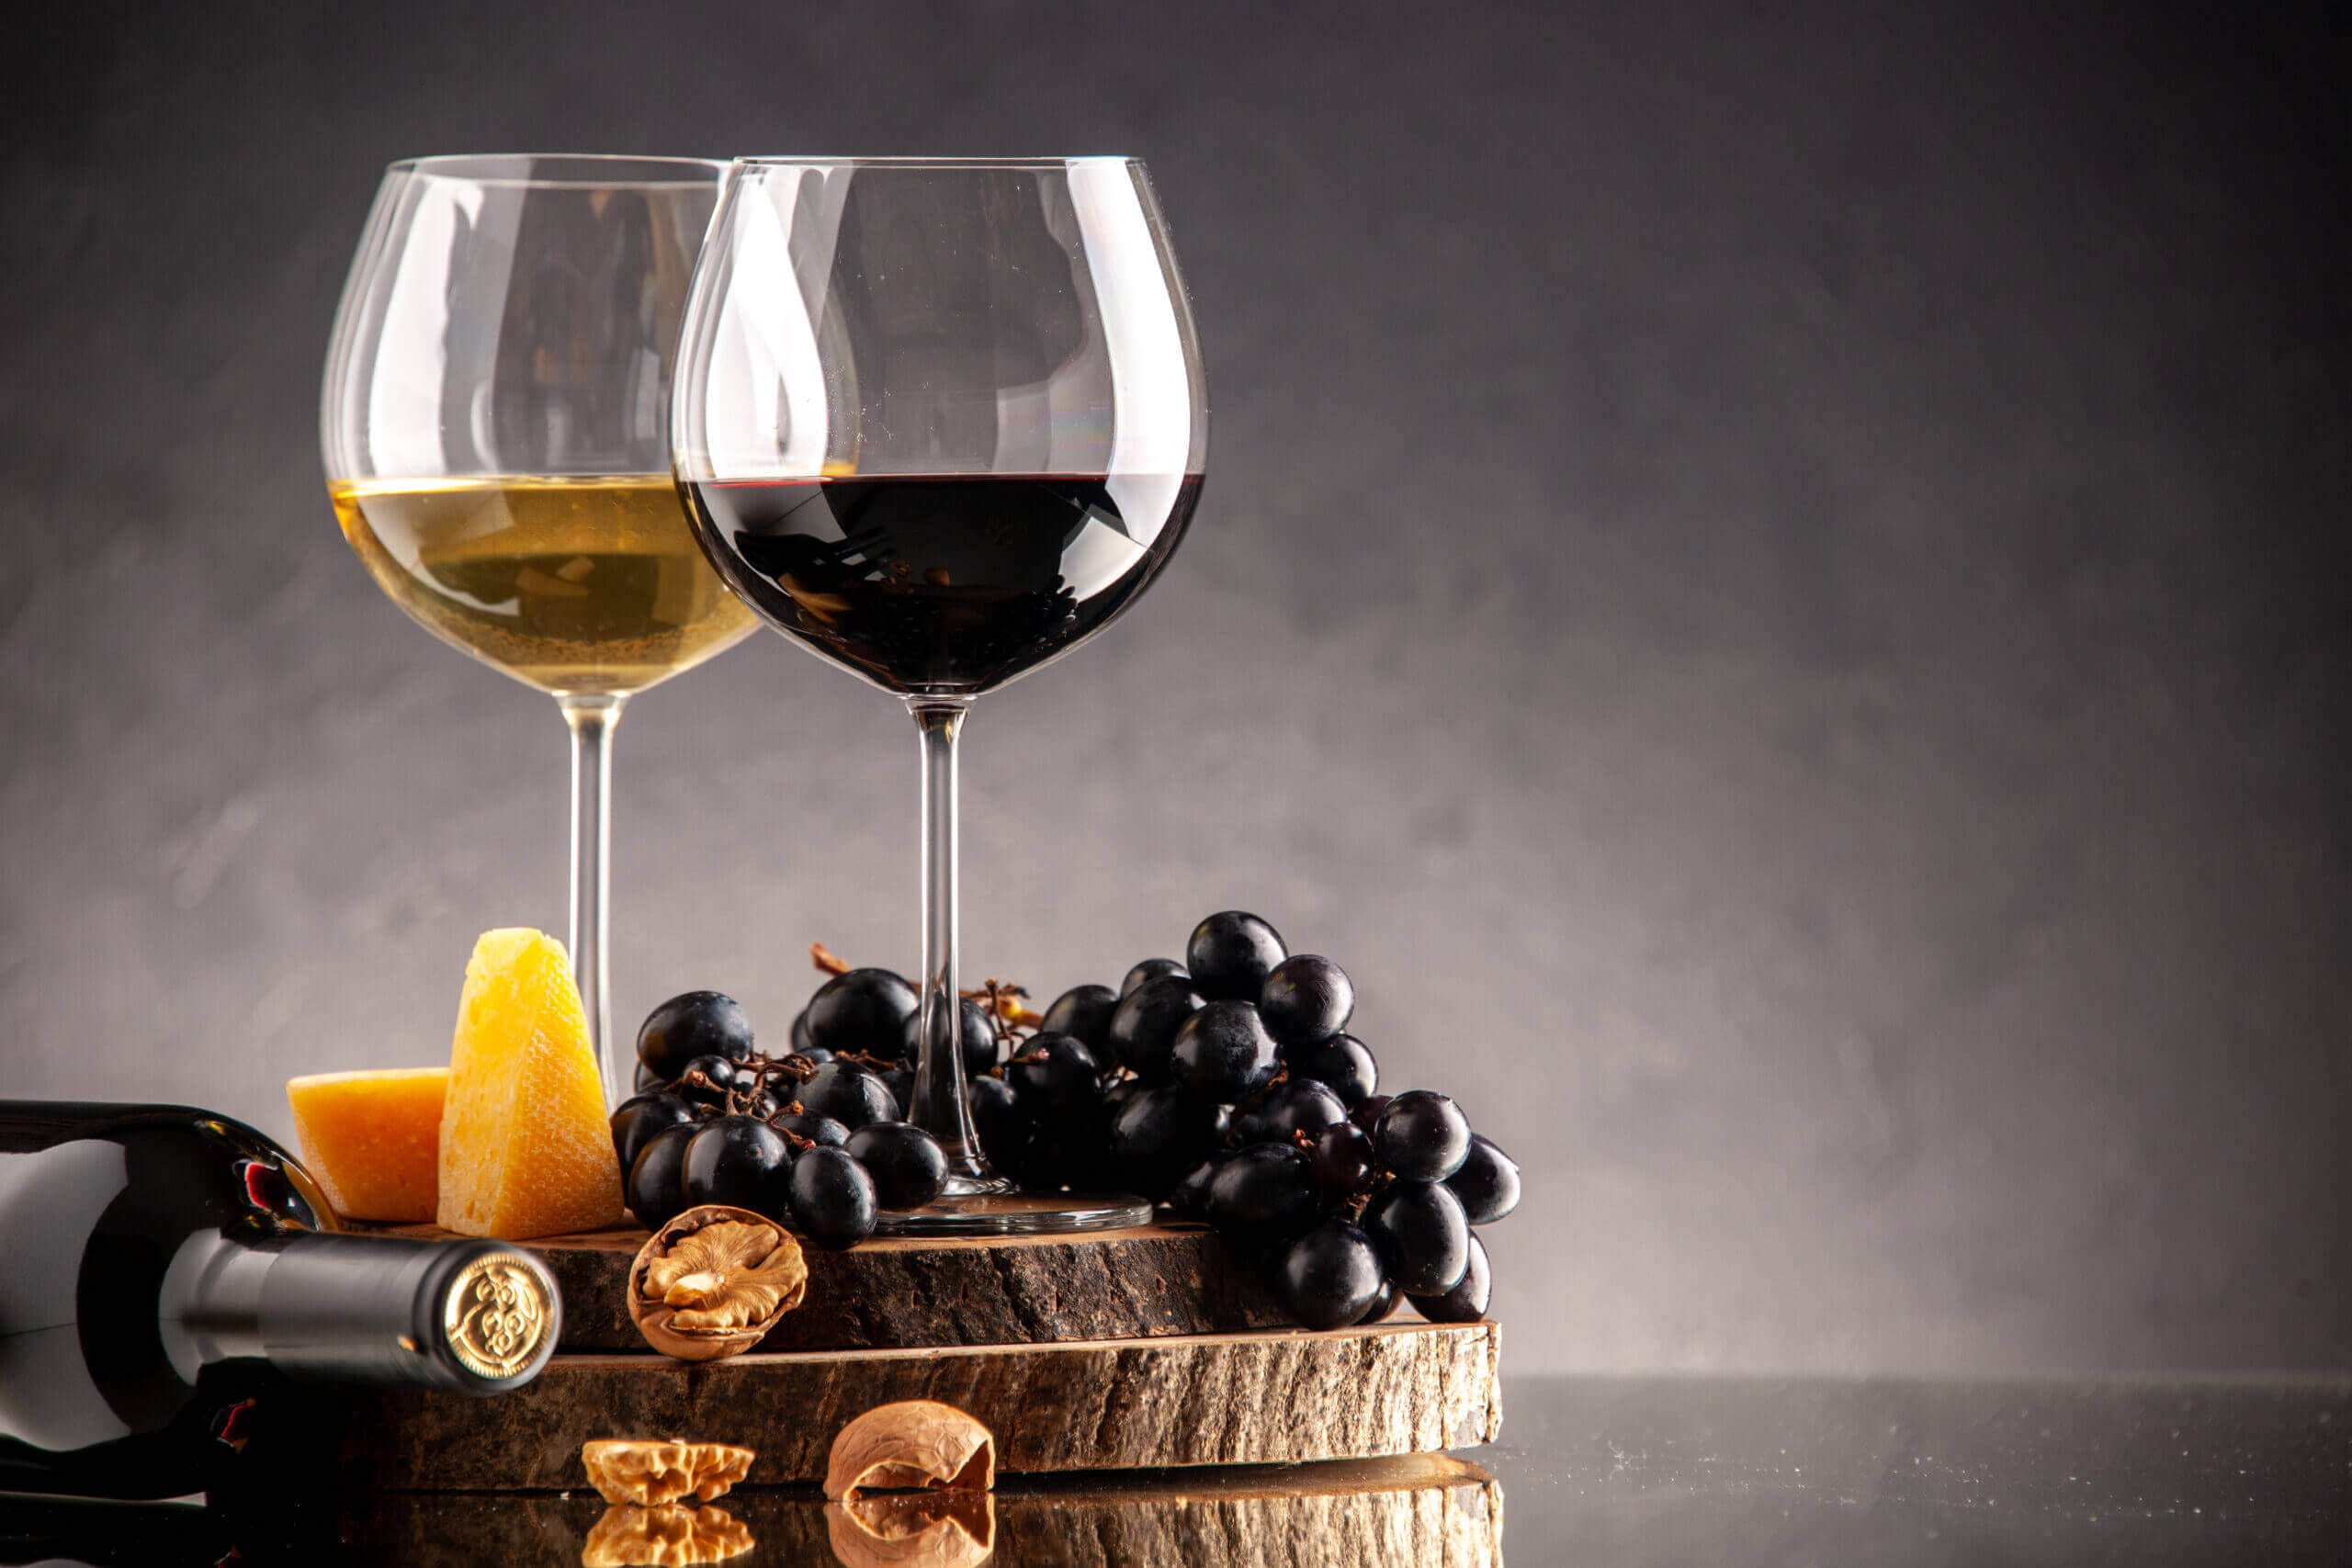 front view wine glasses fresh grapes walnuts yellow cheese wood board overturned bottle dark background scaled